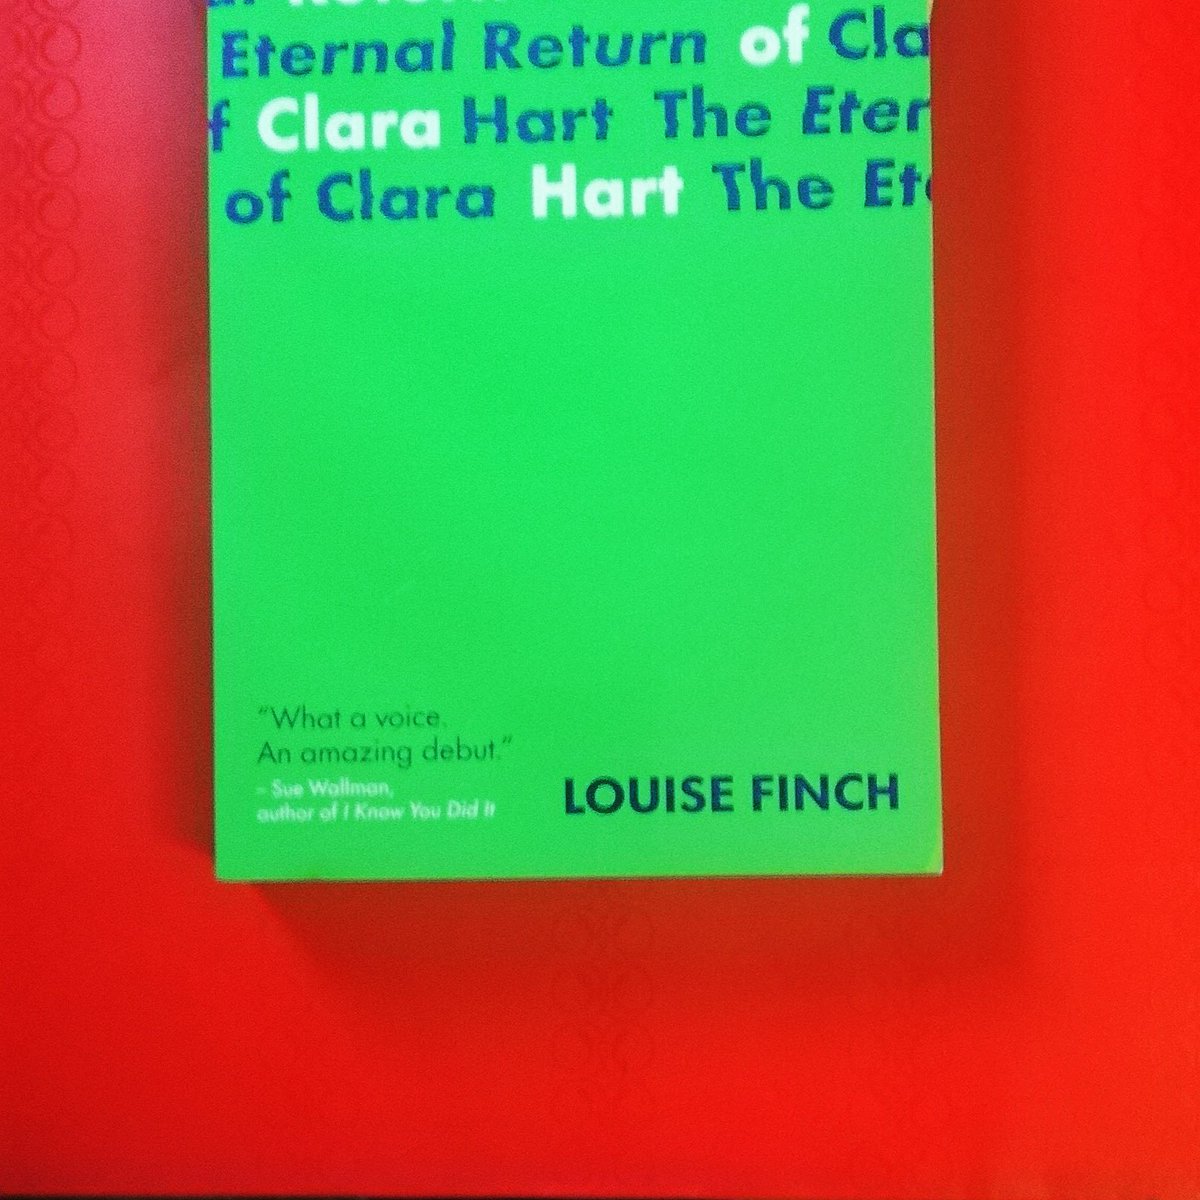 #theeternalreturnofclarahart #louisefinch @LittleIslandBks #review Spence keeps reliving the day Clara died. Can he avert tragedy caused by toxic masculinity+ gendered violence? Emotive, Powerful+gripping I couldn't put it down. Perfect also for #bookgroups